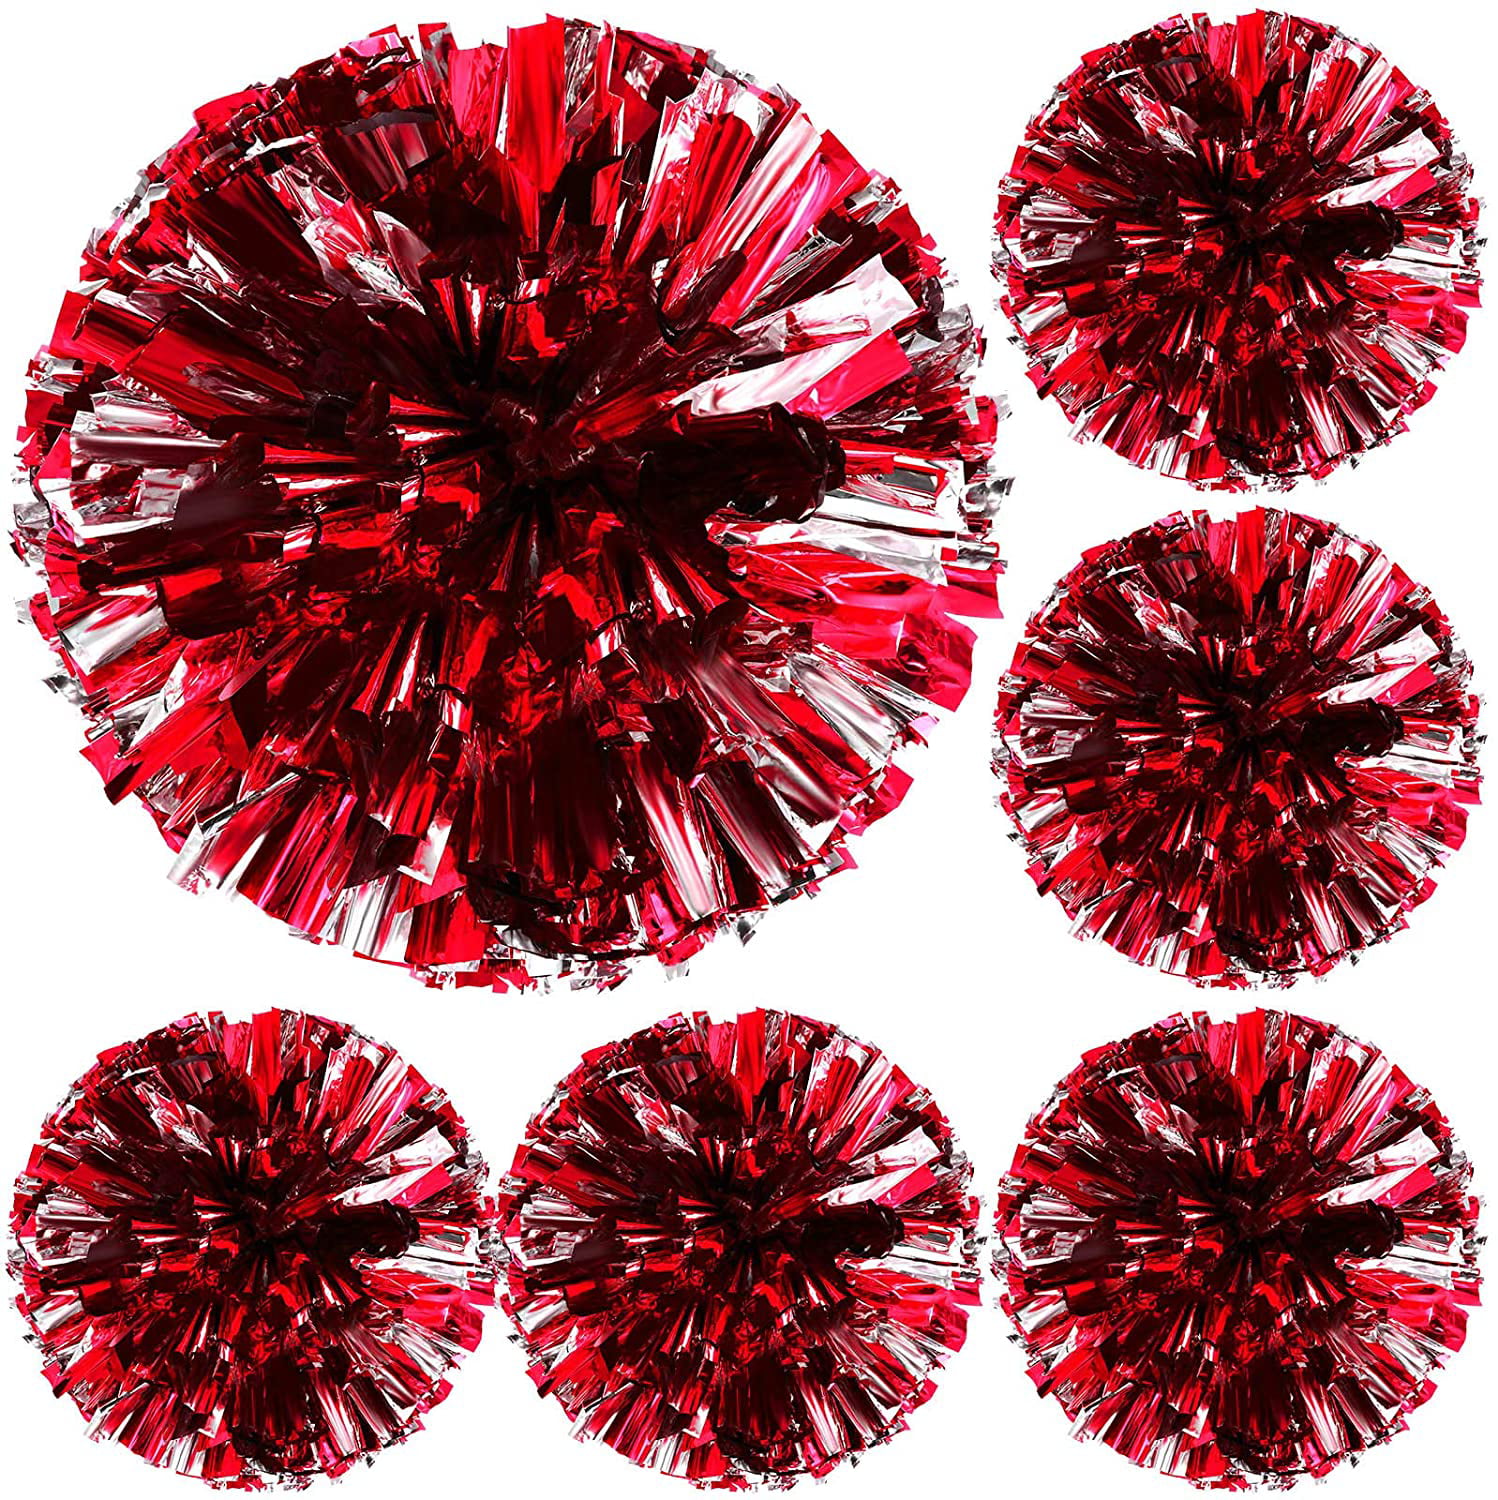 6 pcs Cheerleading Aerobics Pompoms Hand Flower with Ring Design for Dance Party Games Competition 5 Colors Plastic Pom Poms 